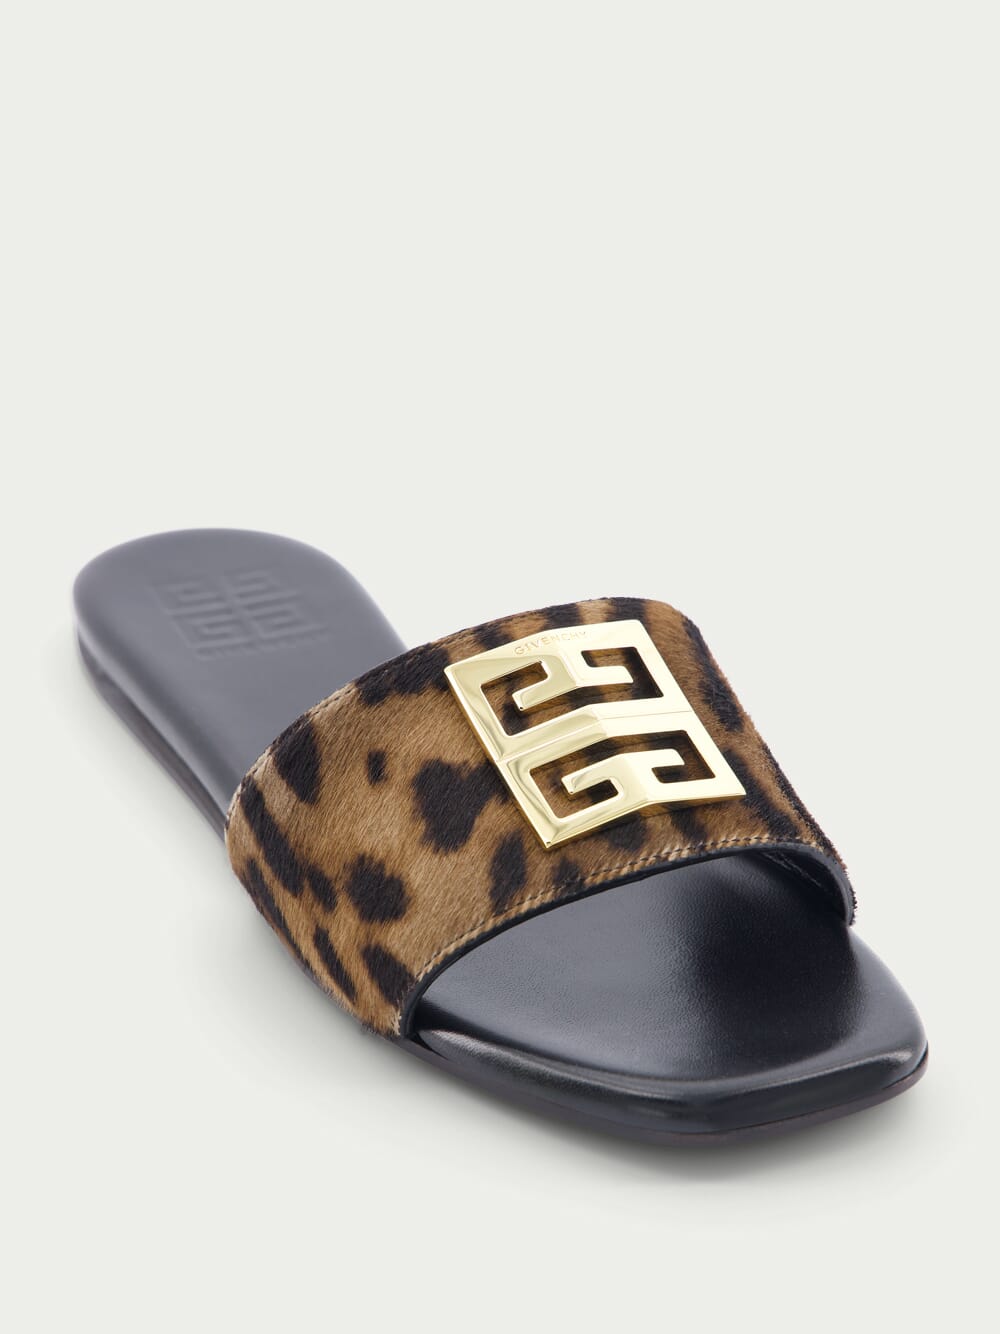 Givenchy4G Leopard Flat Sandals at Fashion Clinic